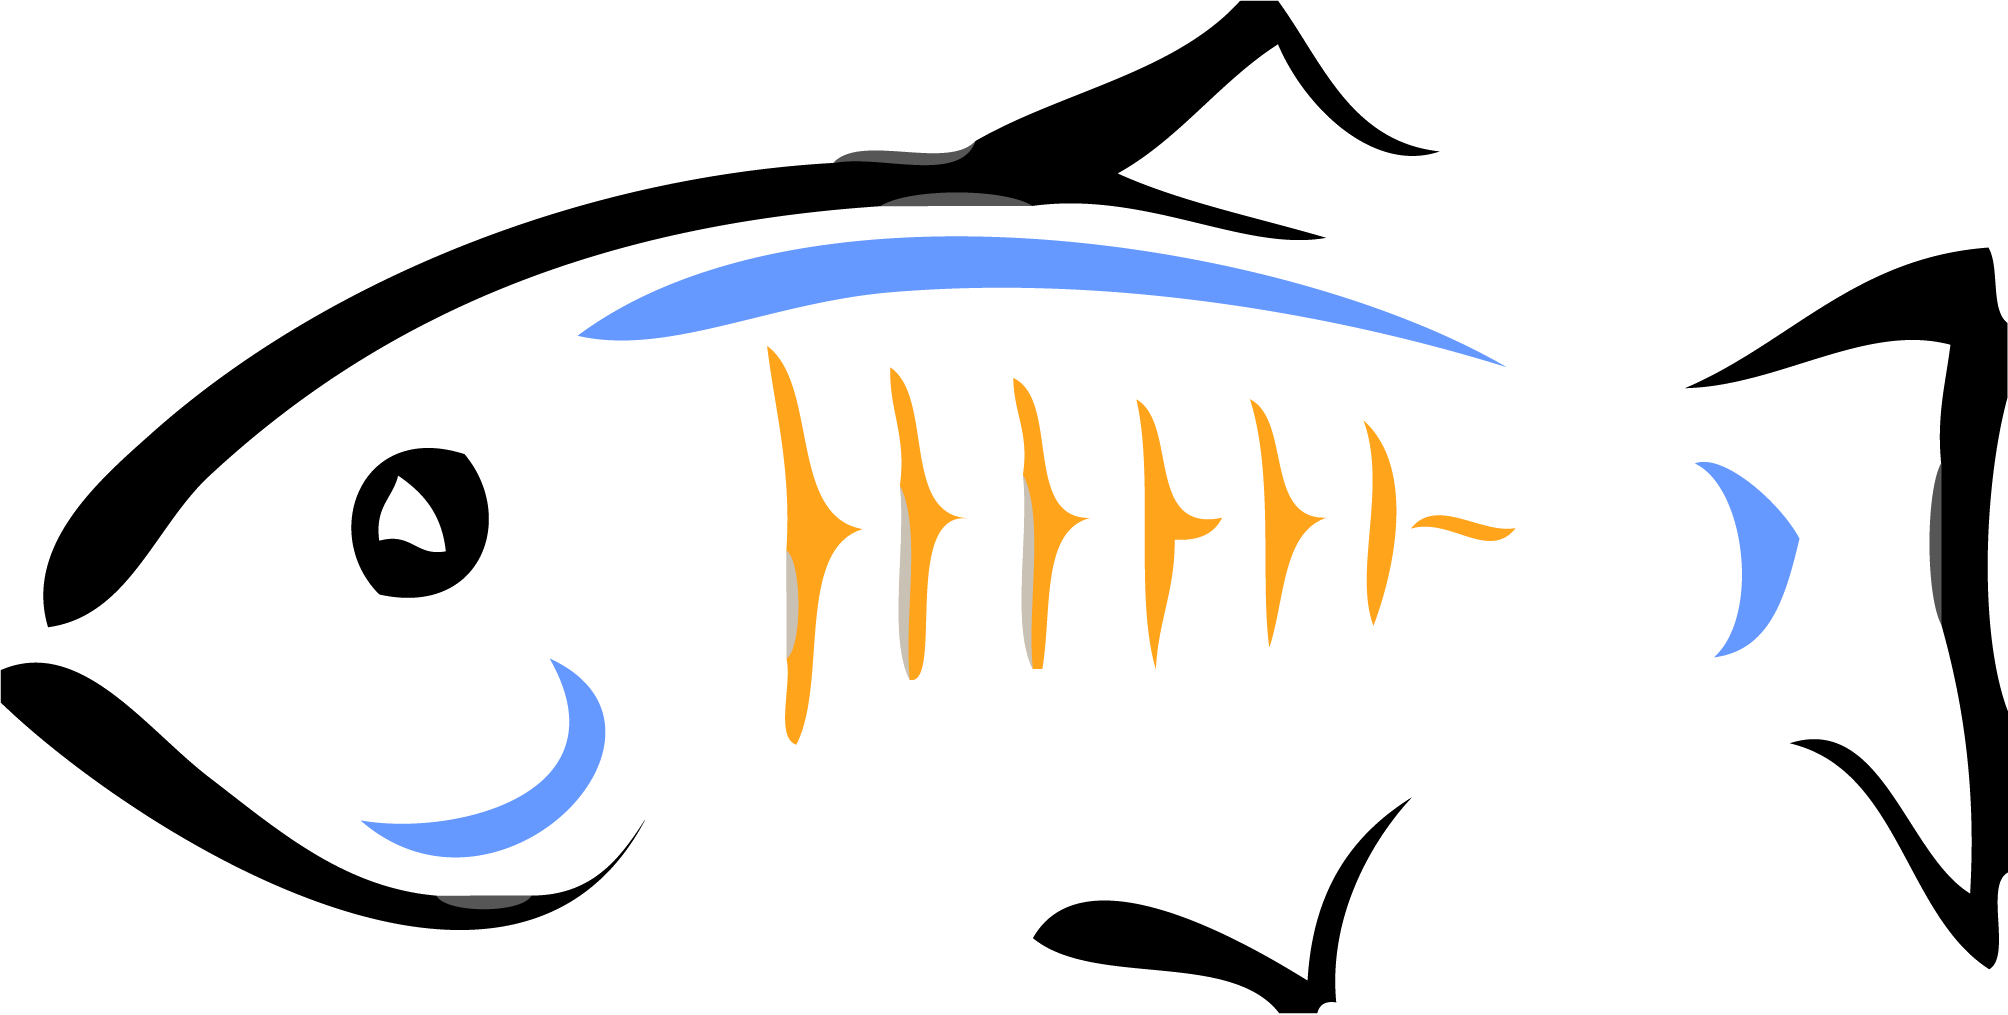 A Fish Skeleton With Blue And Orange Stripes